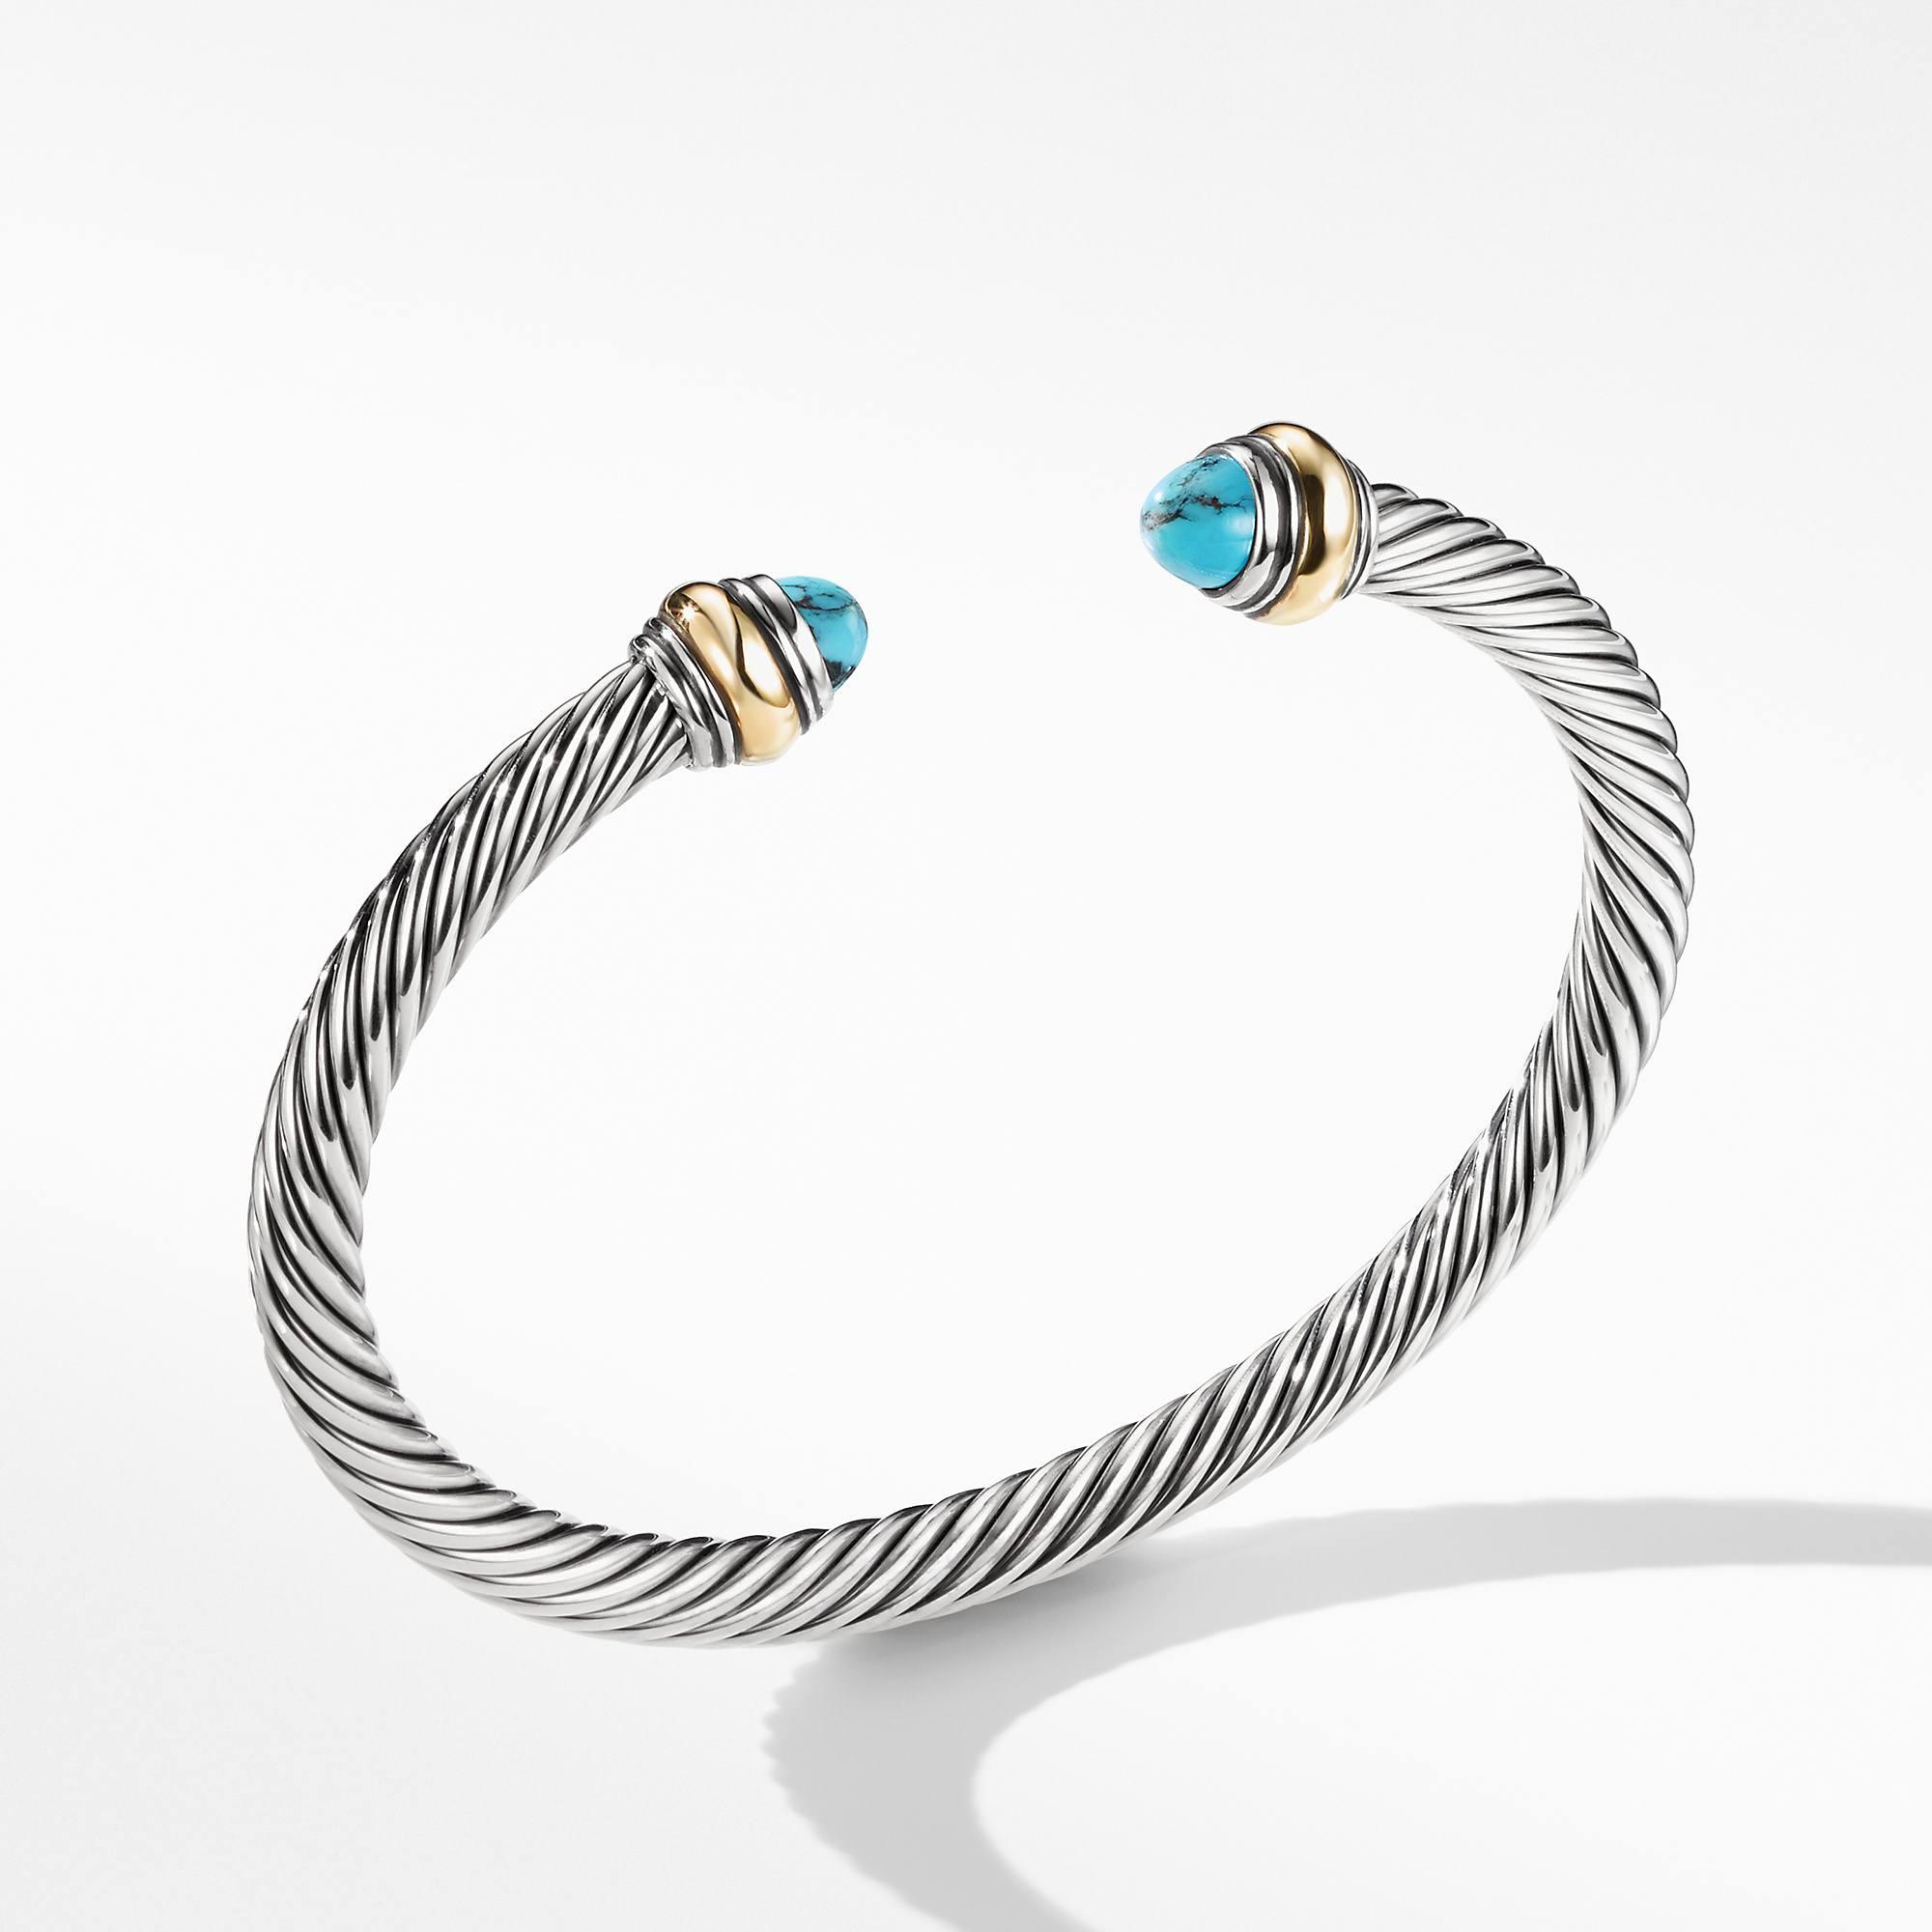 David Yurman Bracelet with Turquoise and 14K Gold